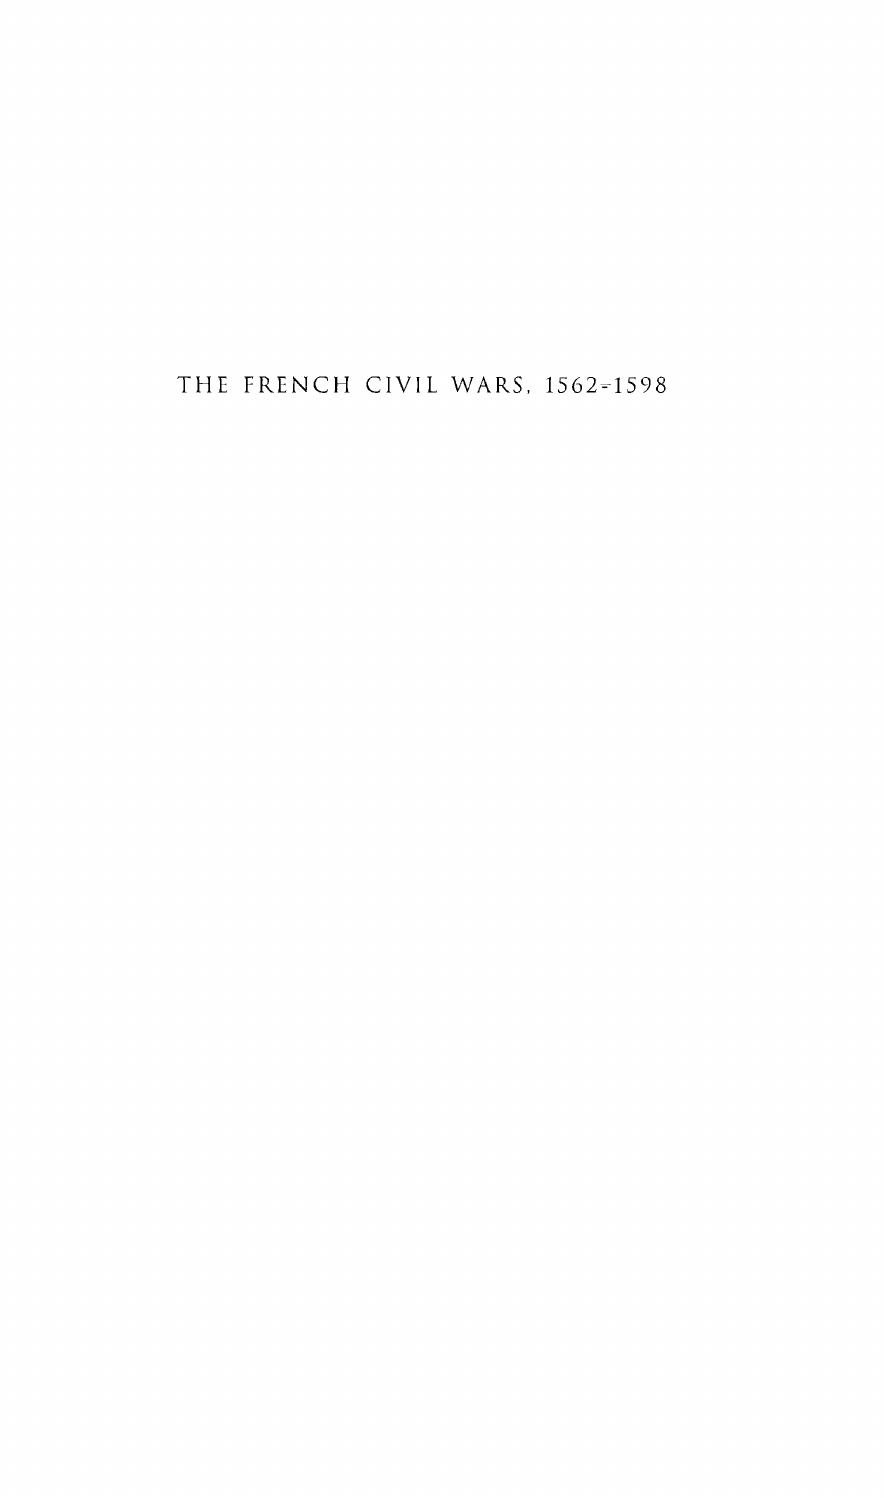 The French Civil Wars, 1562-1598 by Robert J. Knecht